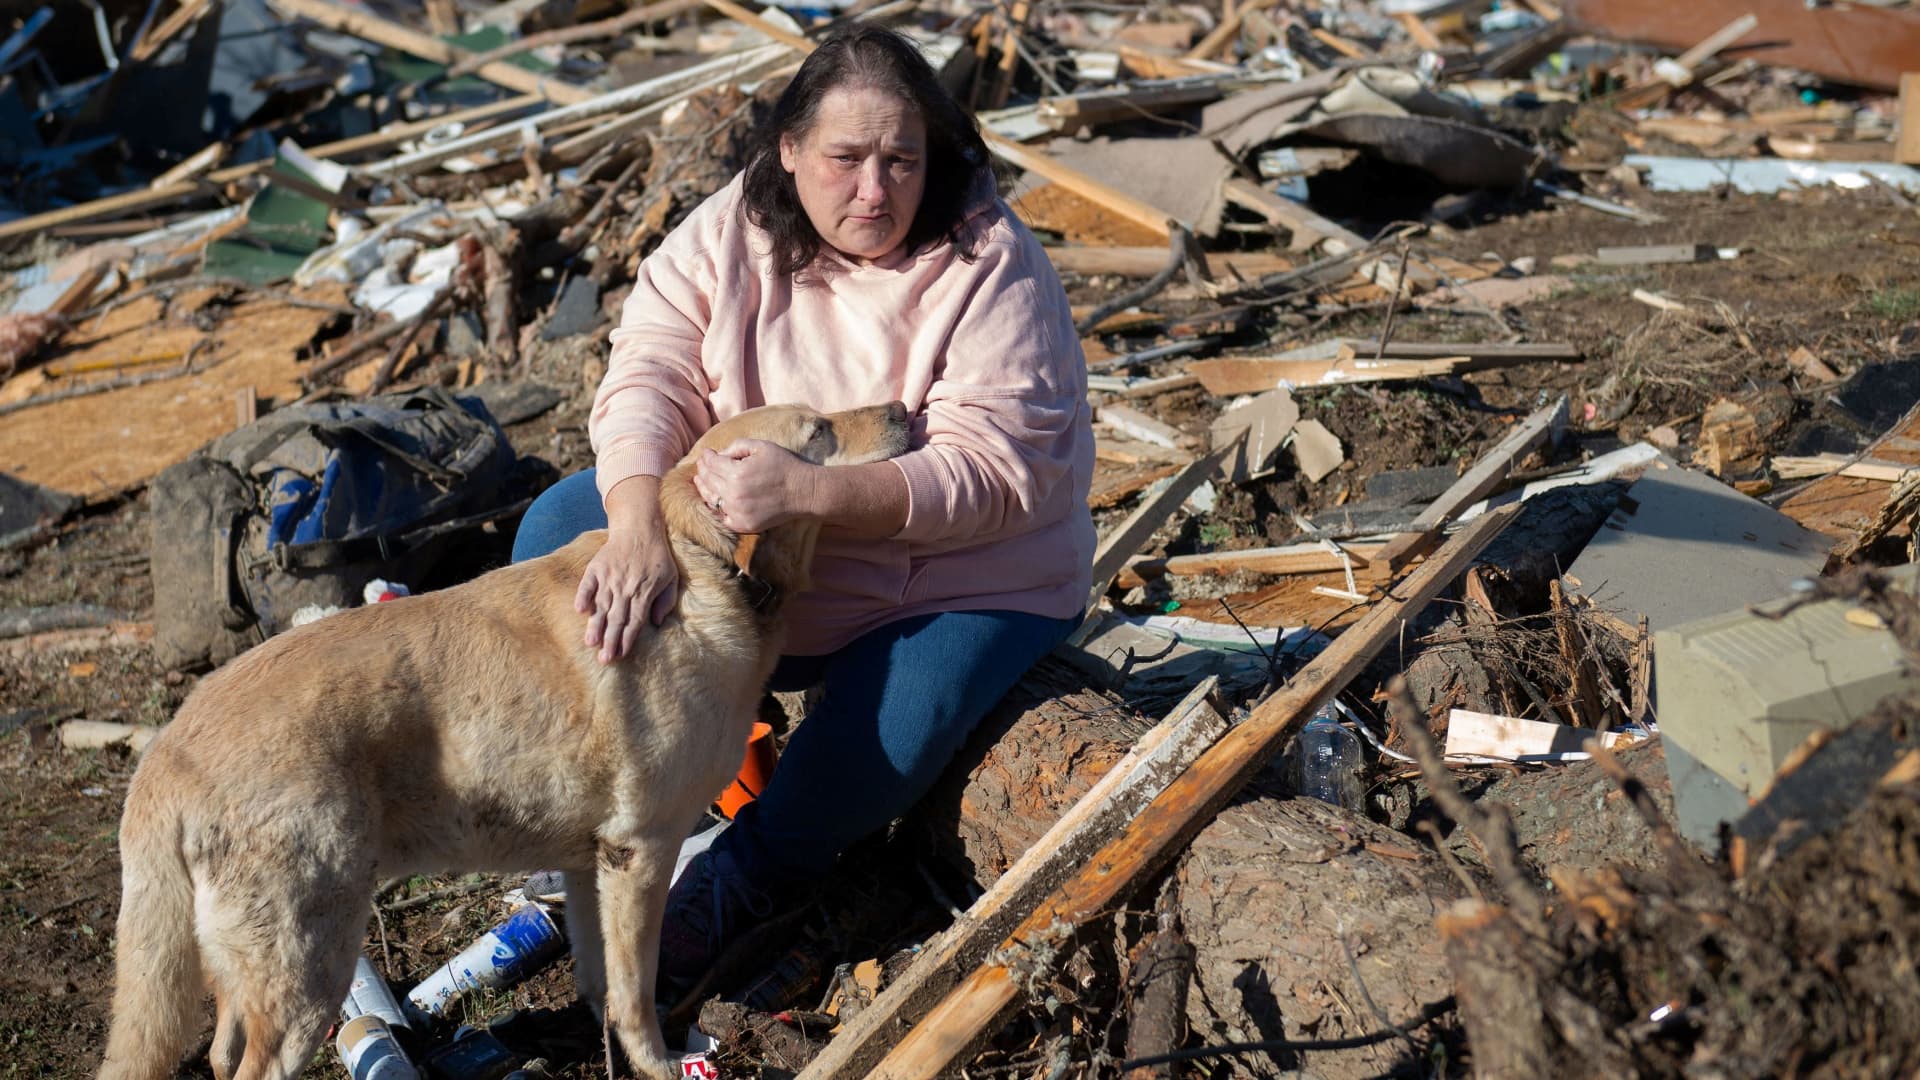 Charlene Stanley of Central City, Kentucky holds dog Gus as they search the debris that once was her sister-in-law's home after the tornado in Bremen, Kentucky, U.S. December 12, 2021.